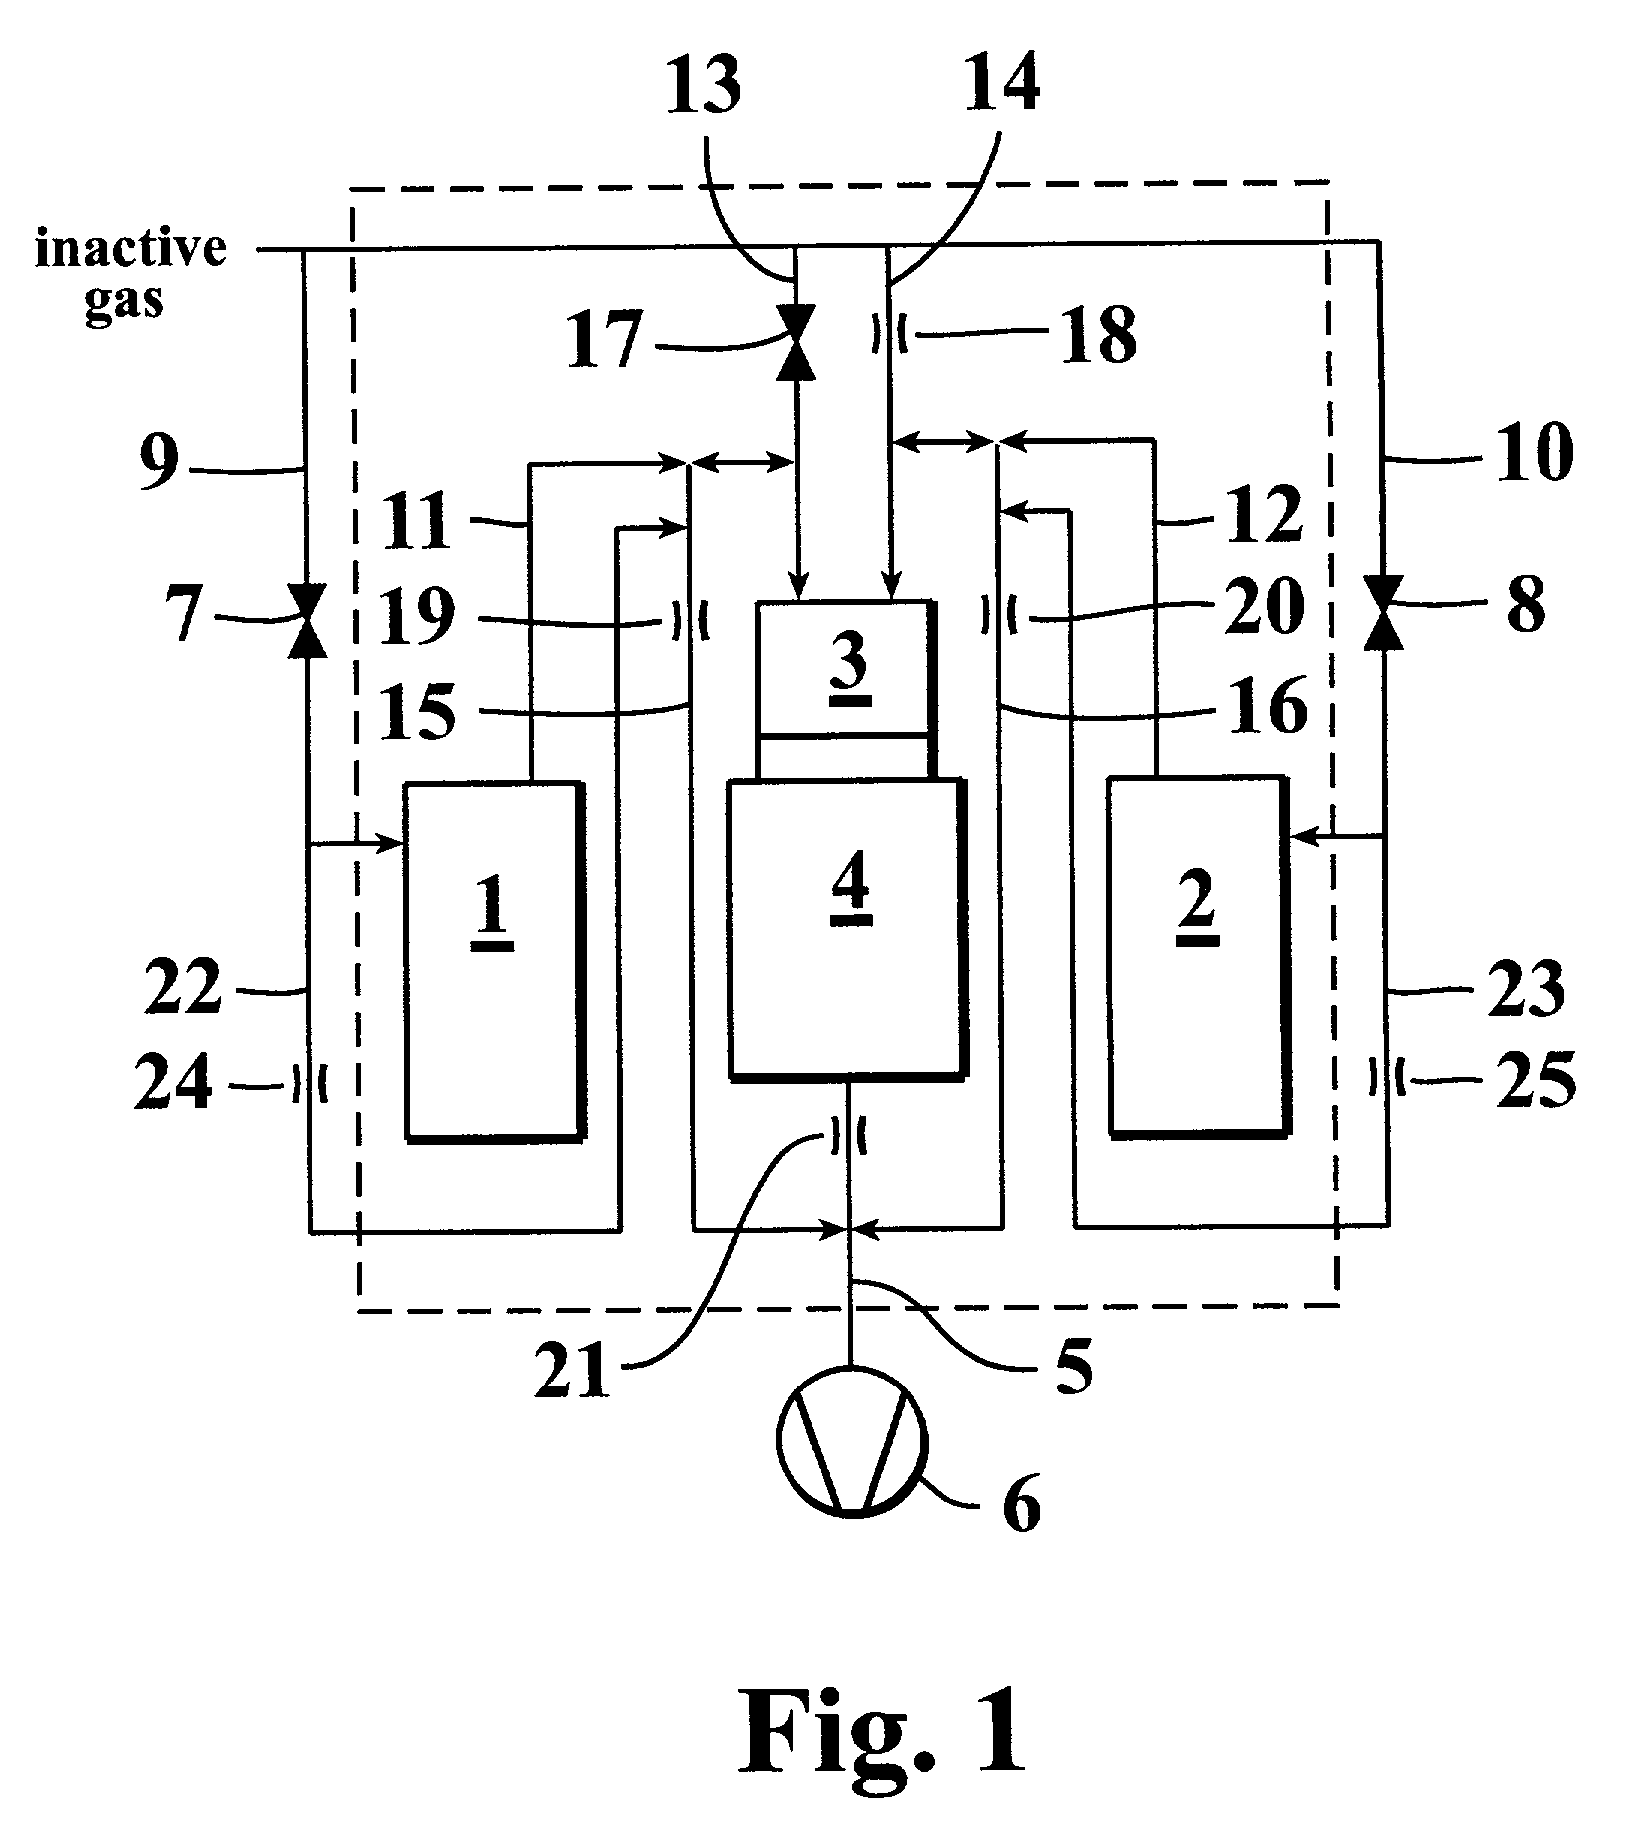 Method and apparatus of growing a thin film onto a substrate